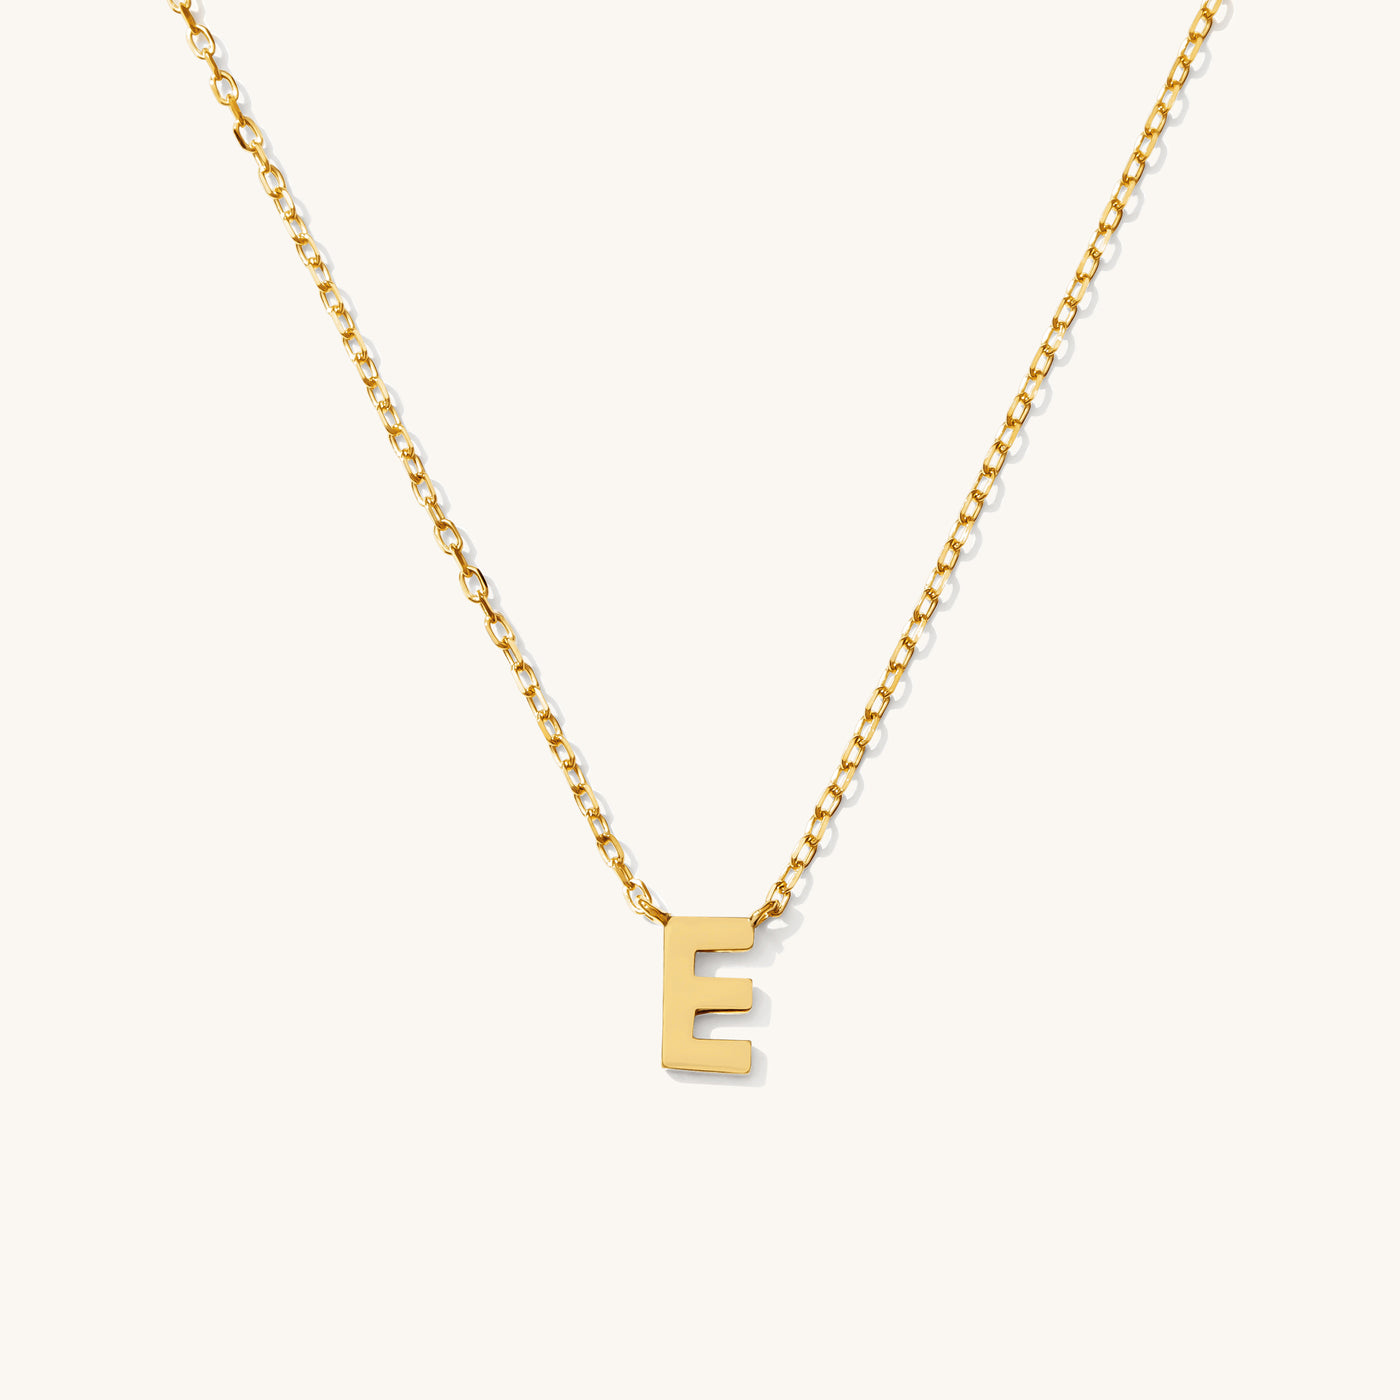 E Tiny Initial Necklace - 14k Solid Gold